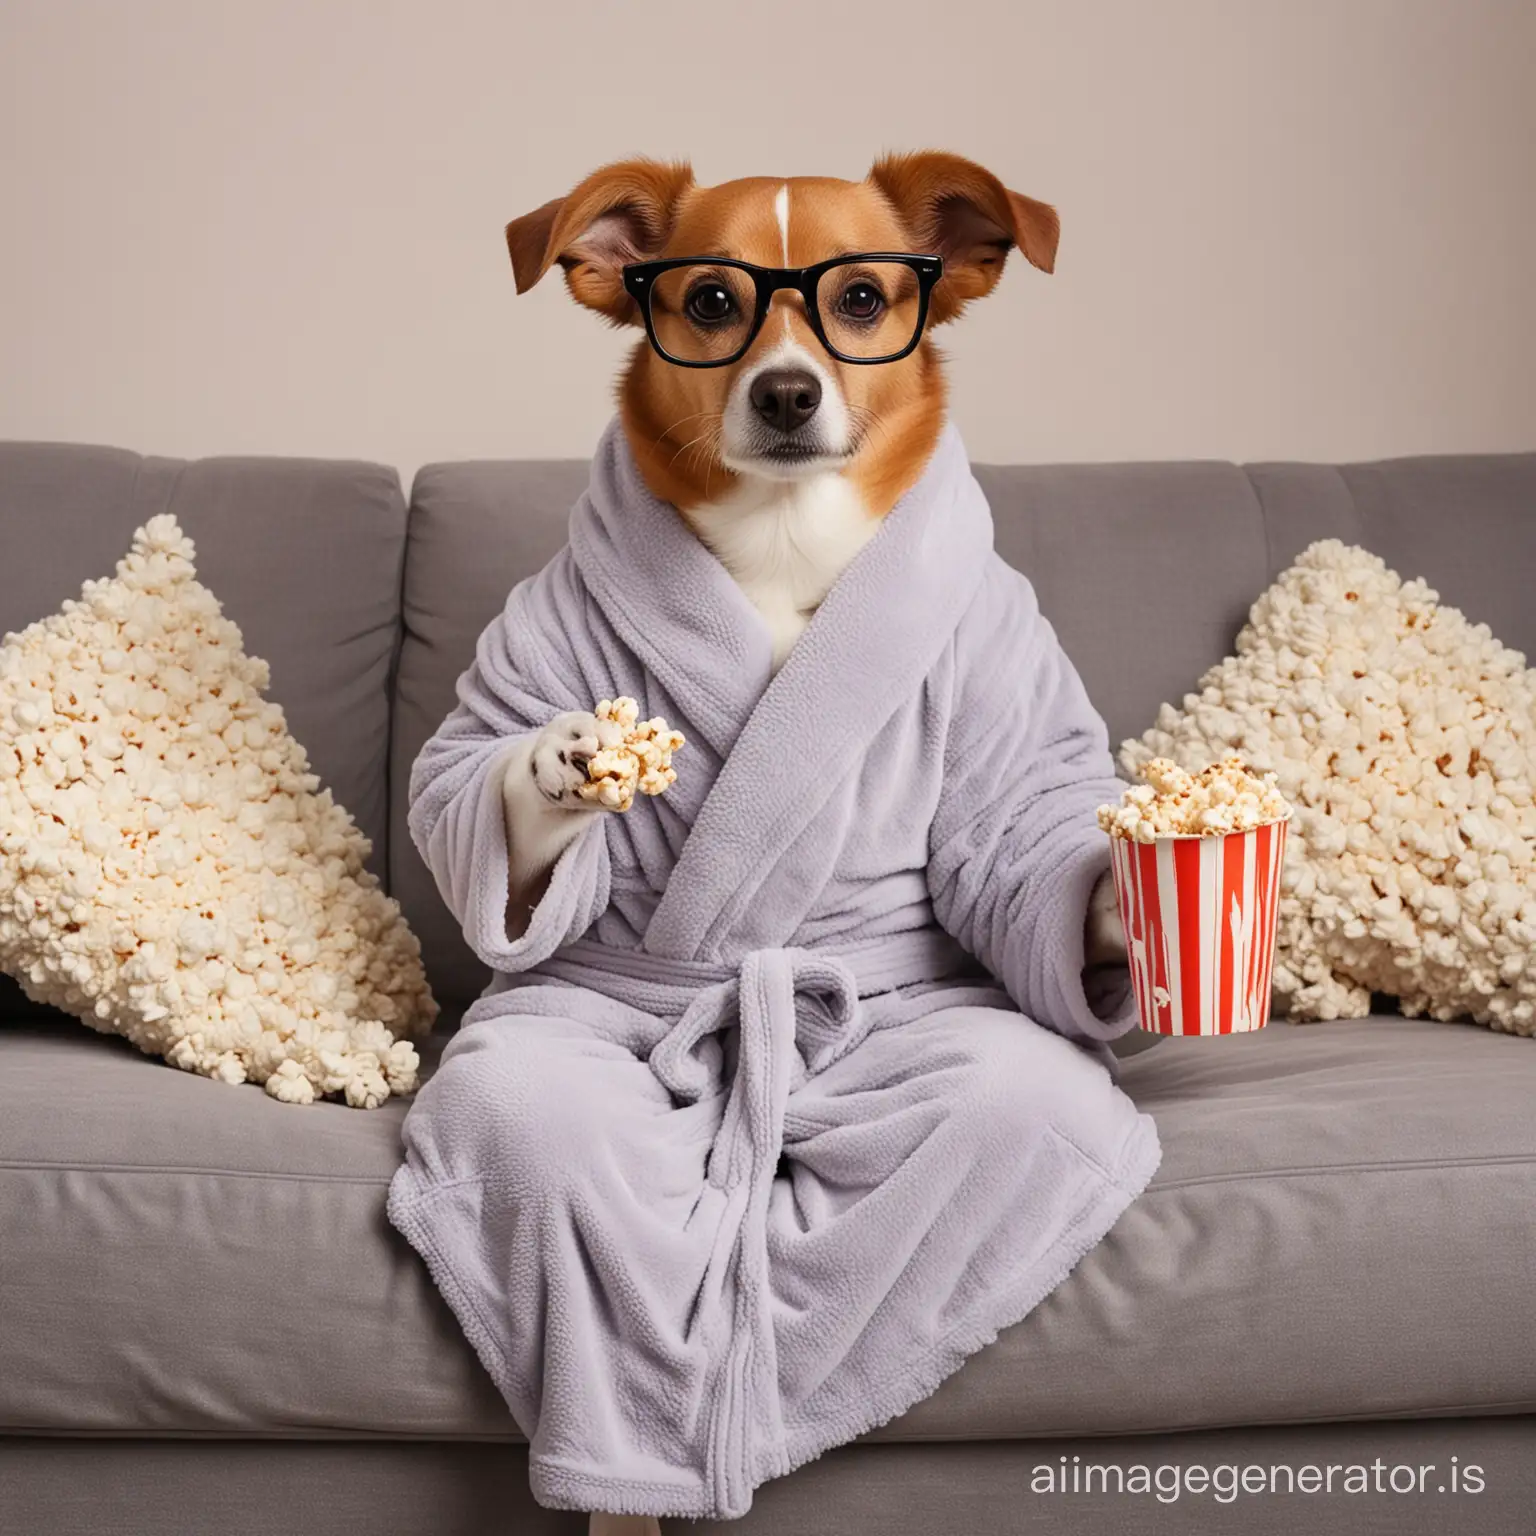 dog in a bathrobe with glasses and popcorn on a sofa